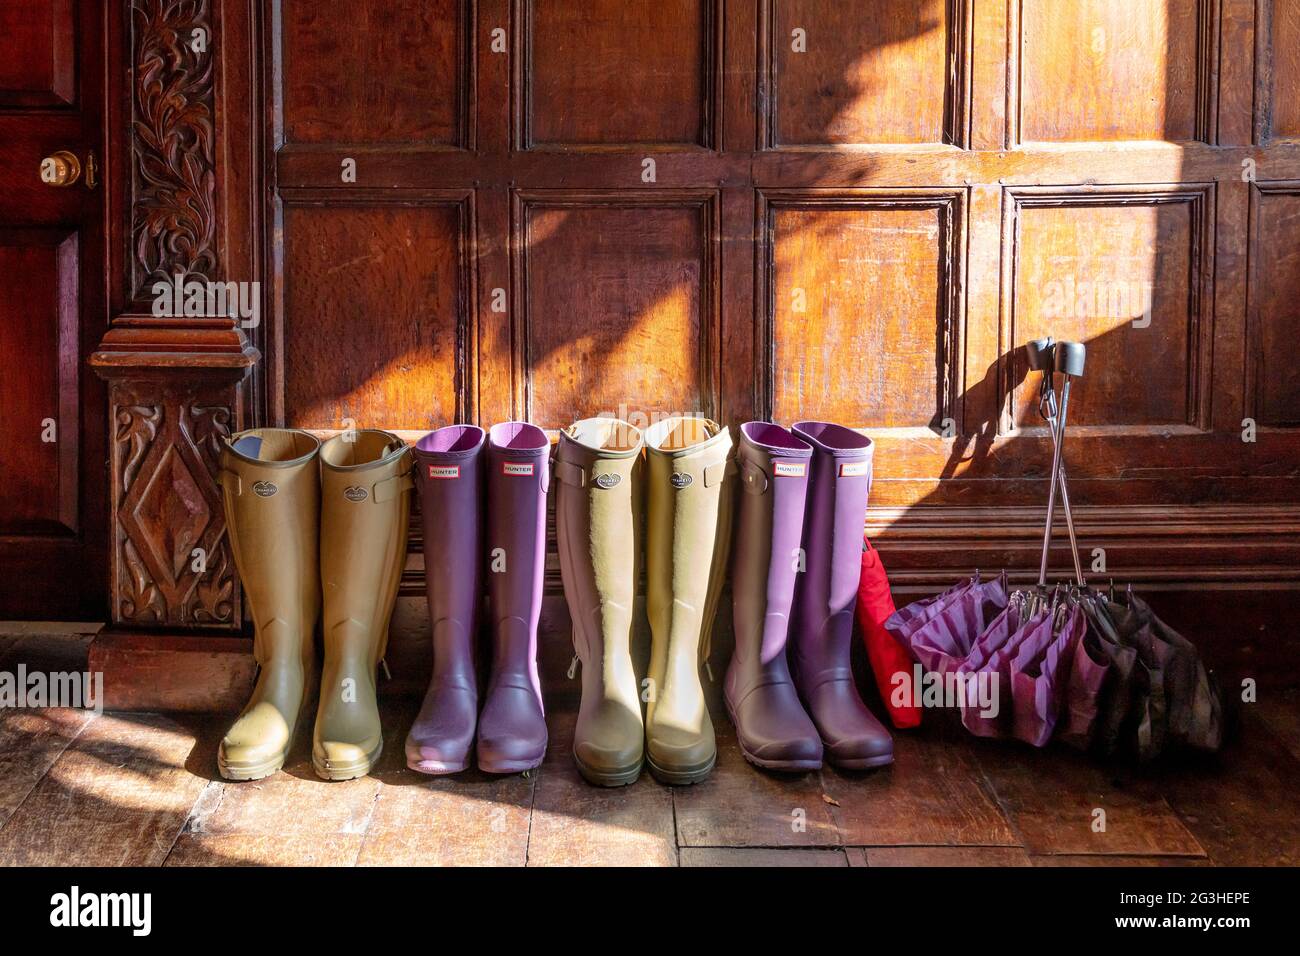 Wellies and umbrellas at front entrance to Manor House Hotel, Castle Combe, Wiltshire, England, UK Stock Photo